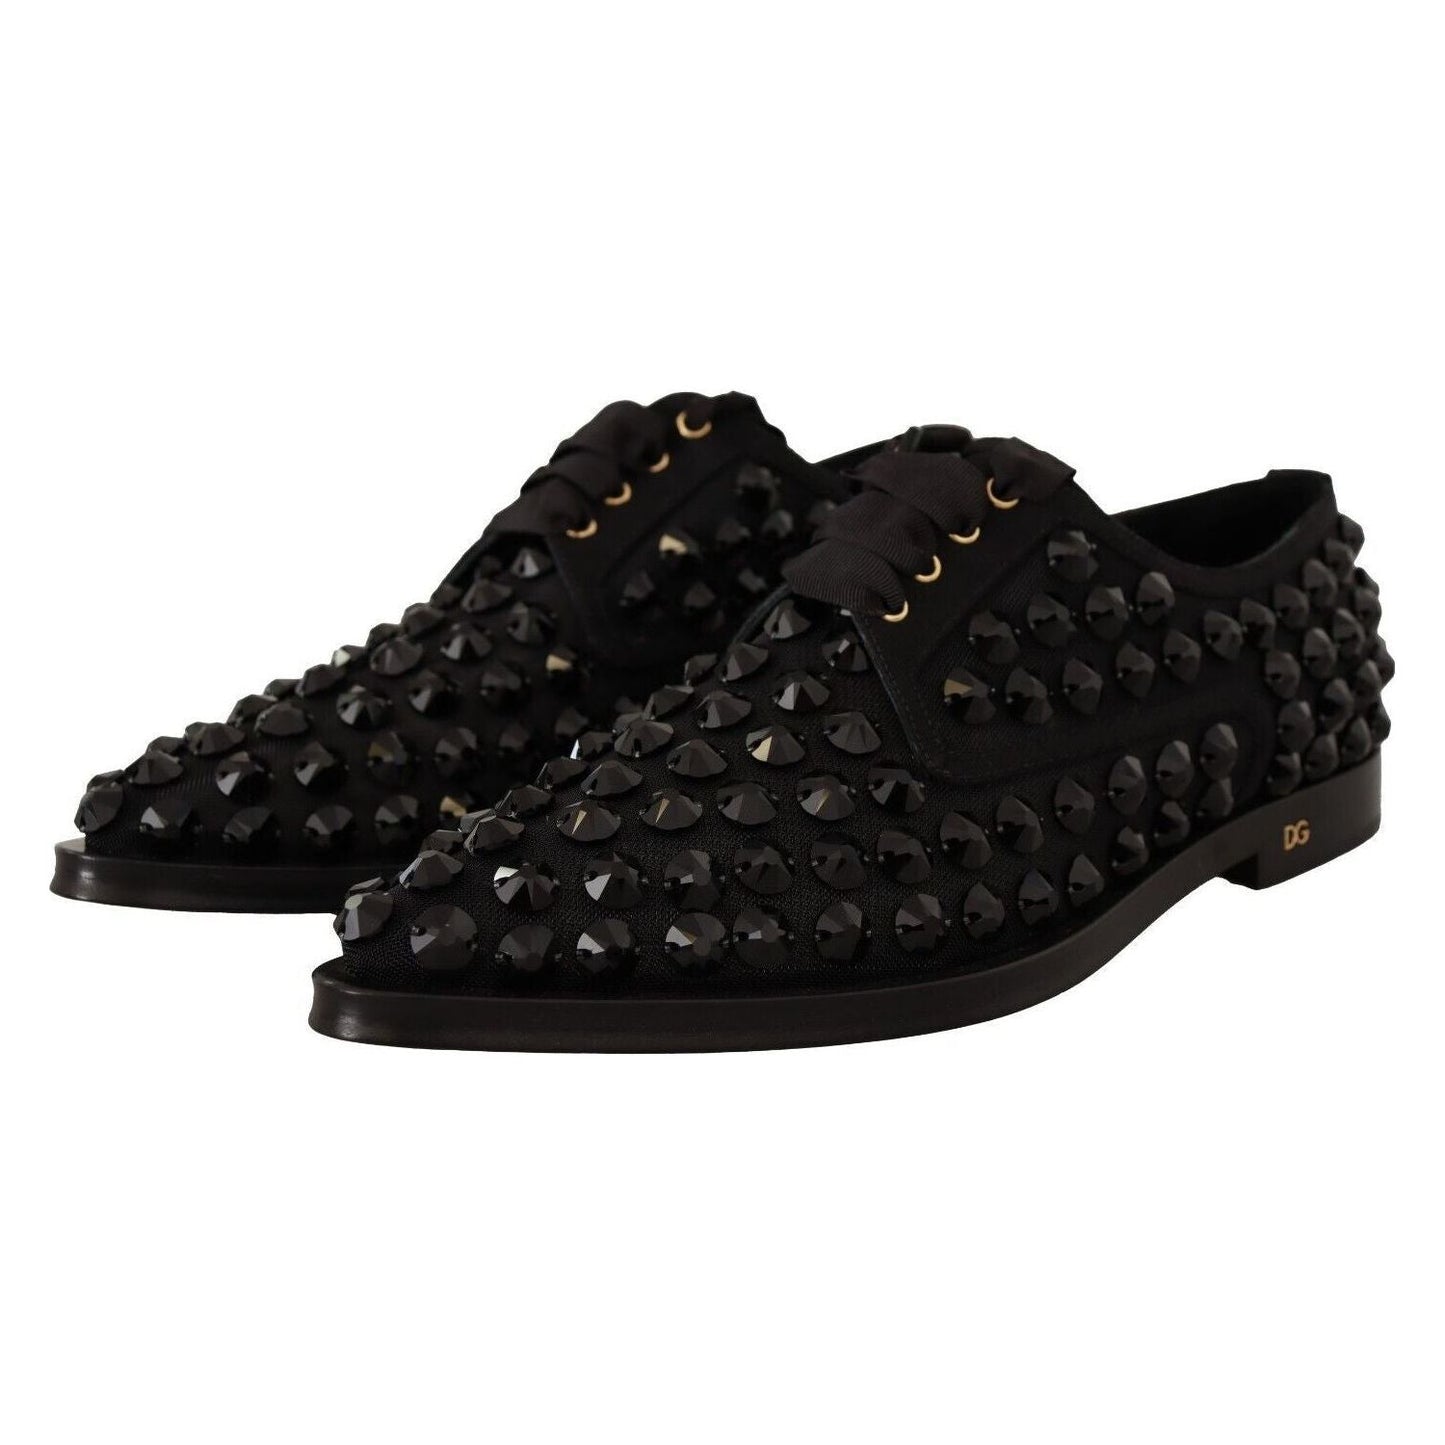 Dolce & Gabbana Elegant Gros Grain Lace-Up Jeweled Flats black-lace-up-studded-formal-flats-shoes